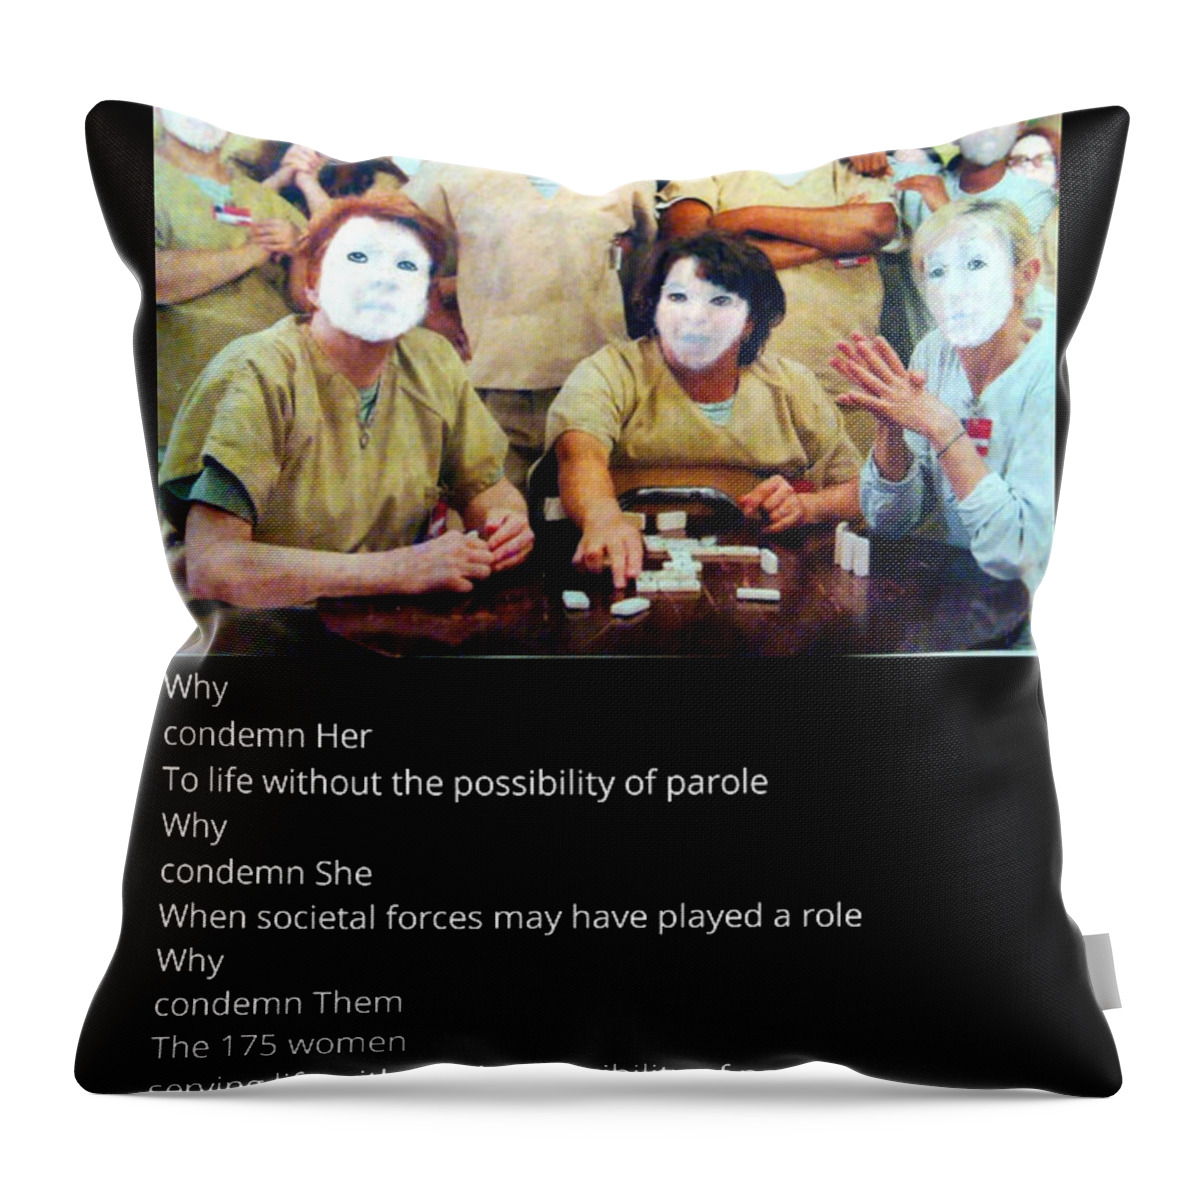 Black Art Throw Pillow featuring the digital art Eyes Without A Face Paintoem by Donald C-Note Hooker